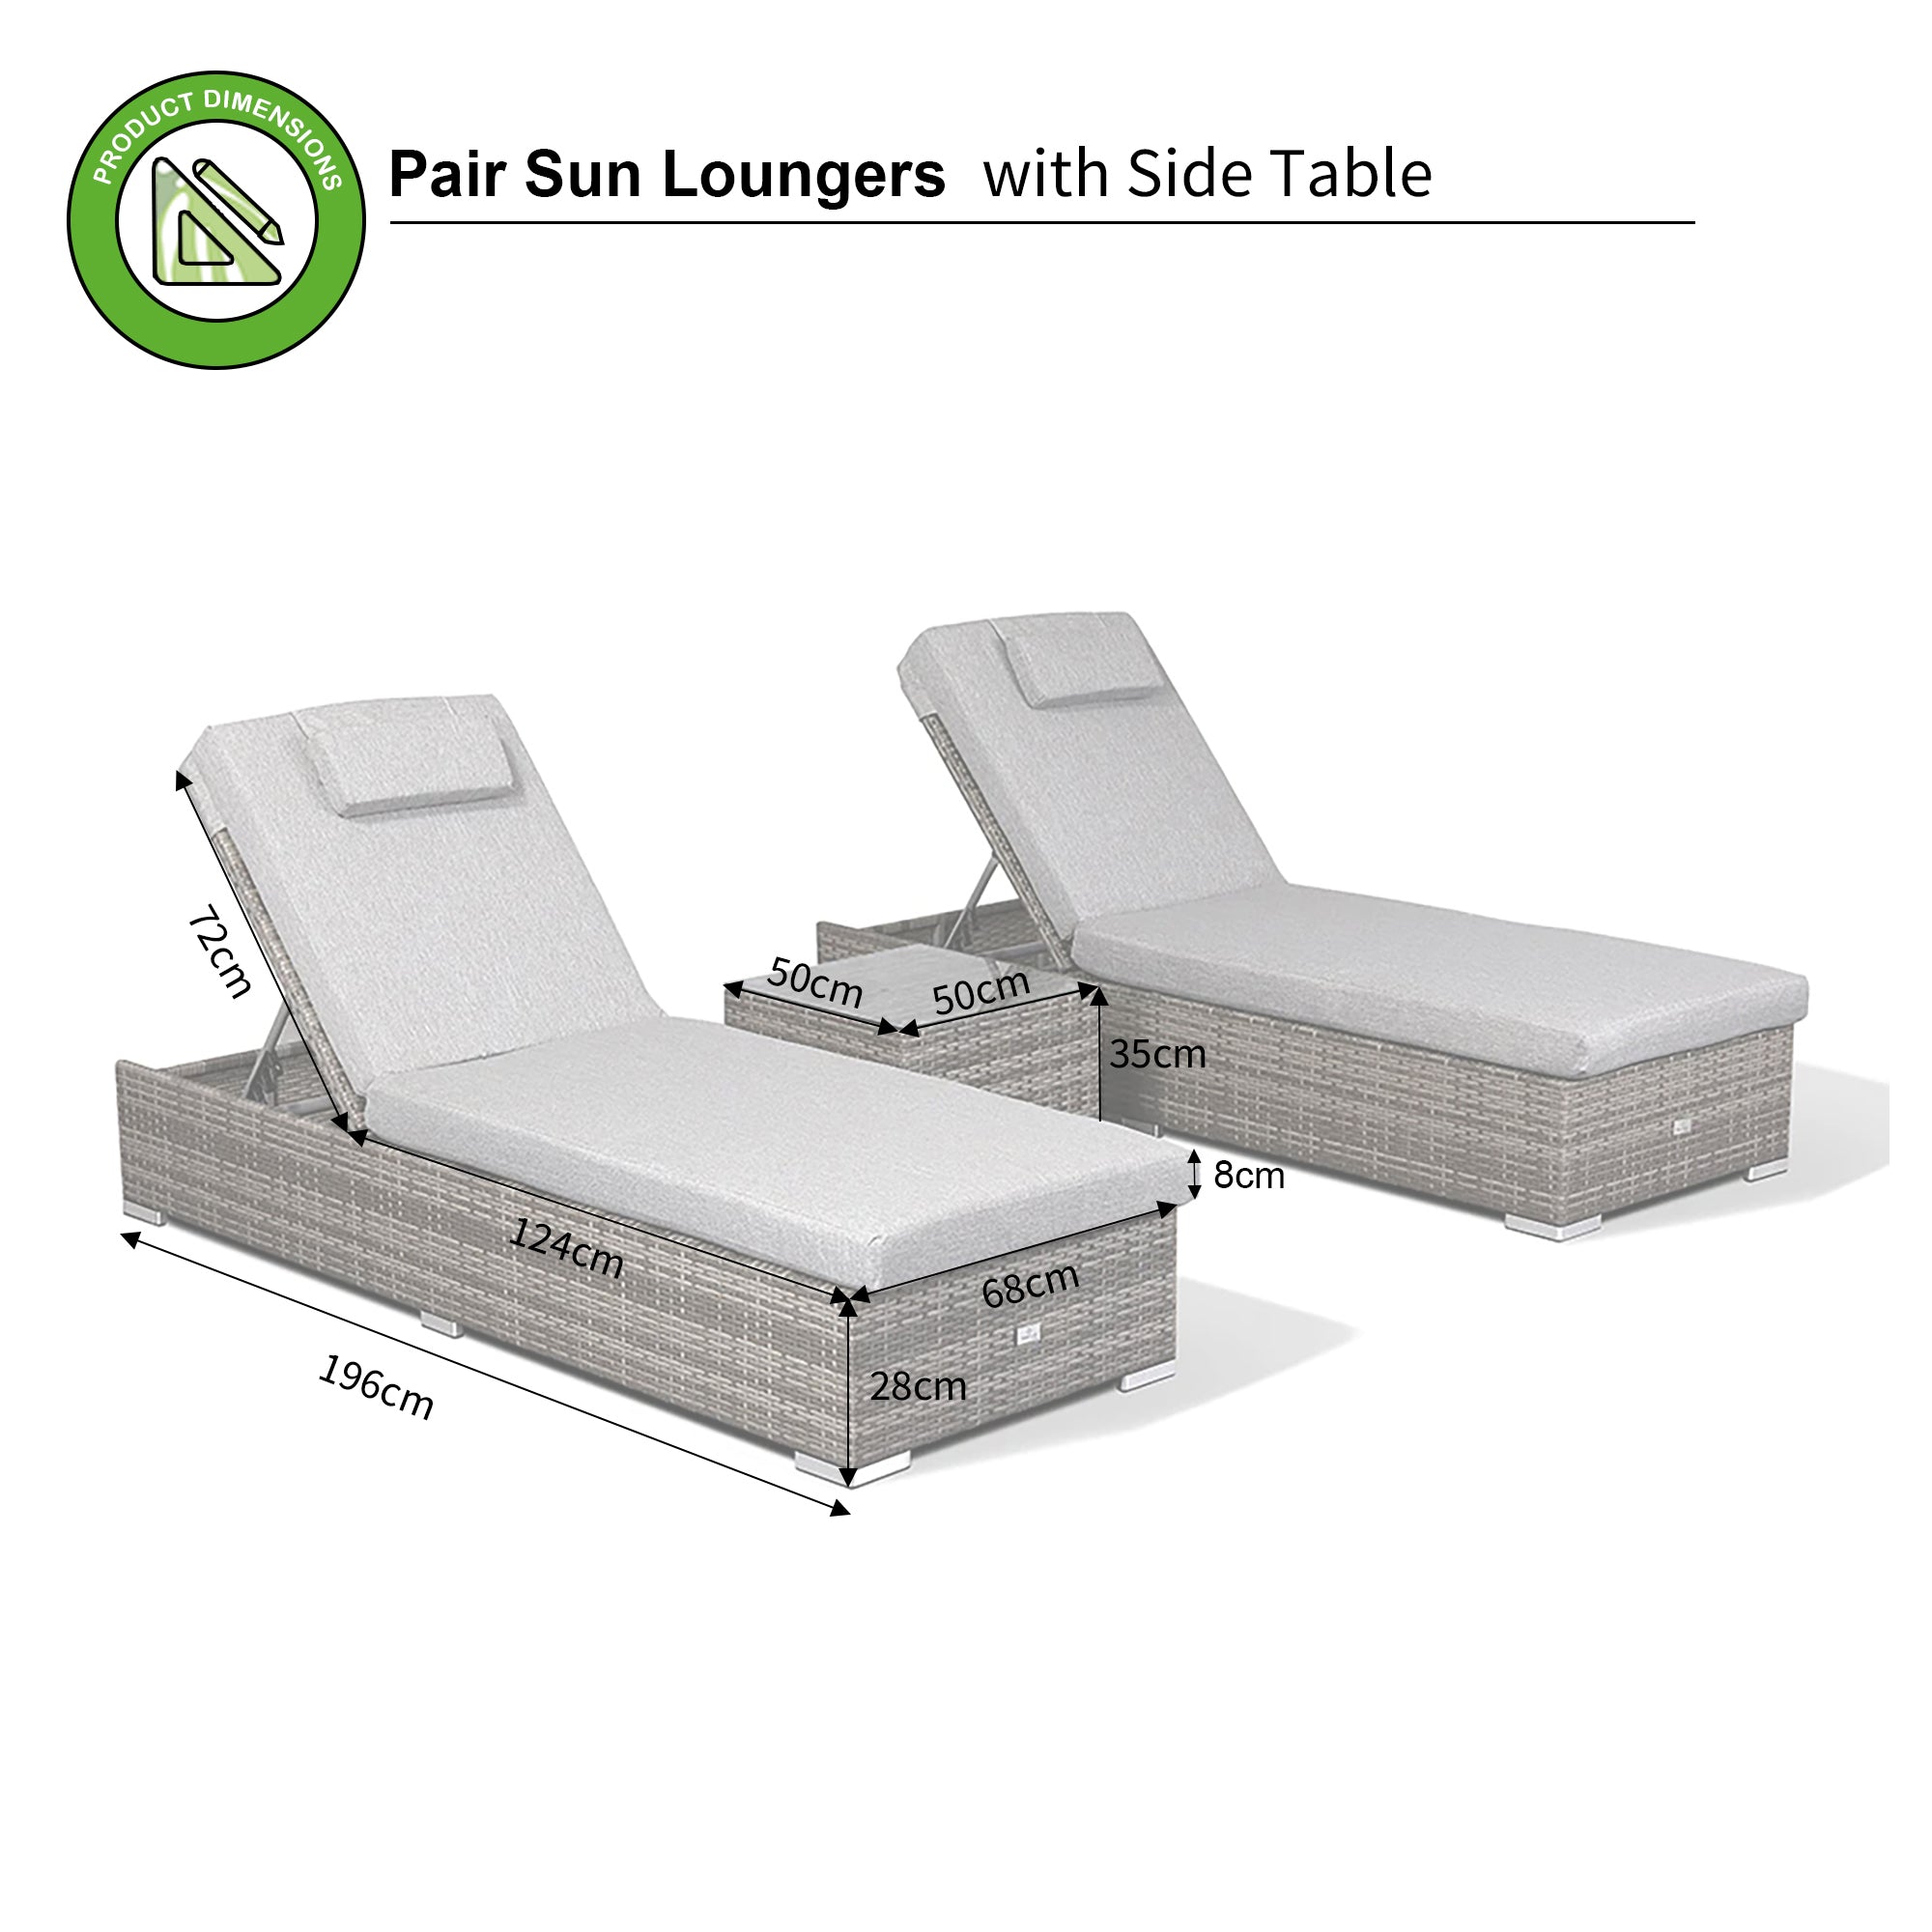 Cambridge Pair Sun Loungers with Side Table in Stone Browne Grey Weave (CR17)